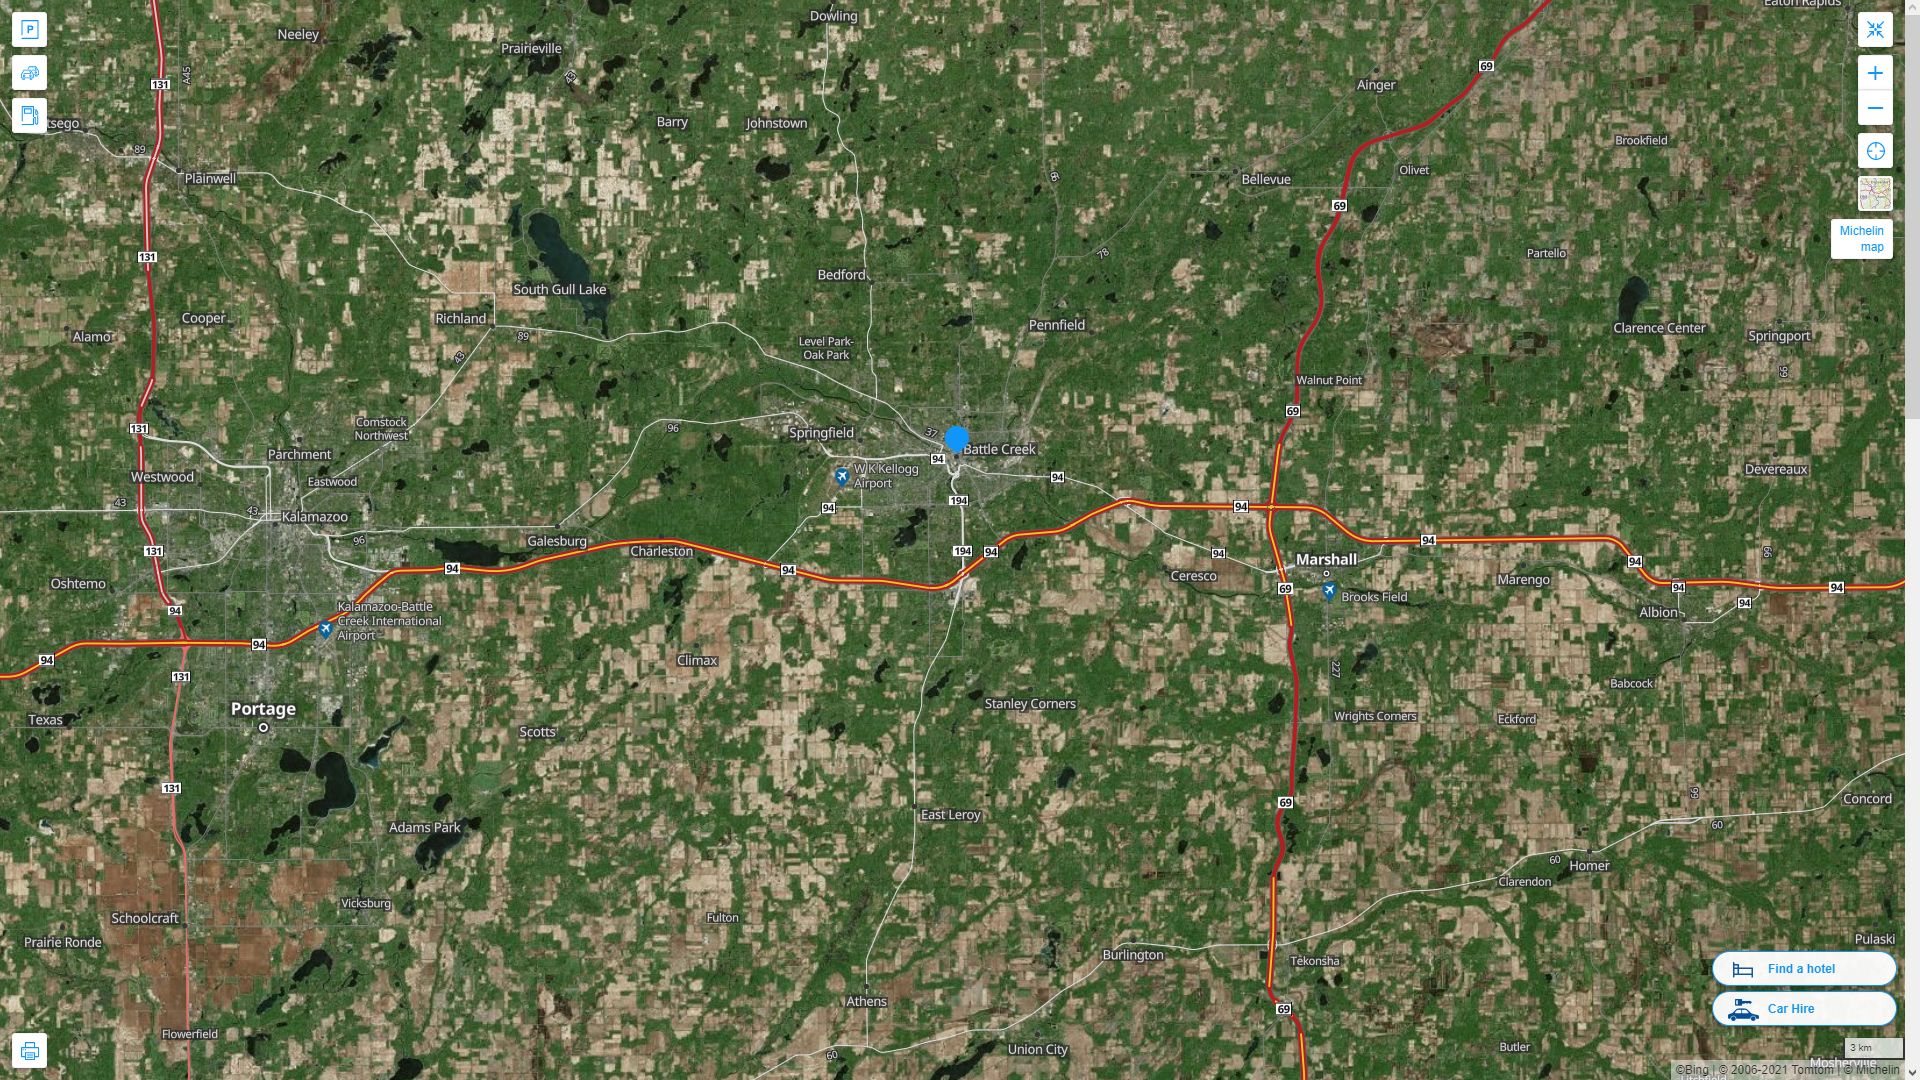 Battle Creek Michigan Highway and Road Map with Satellite View